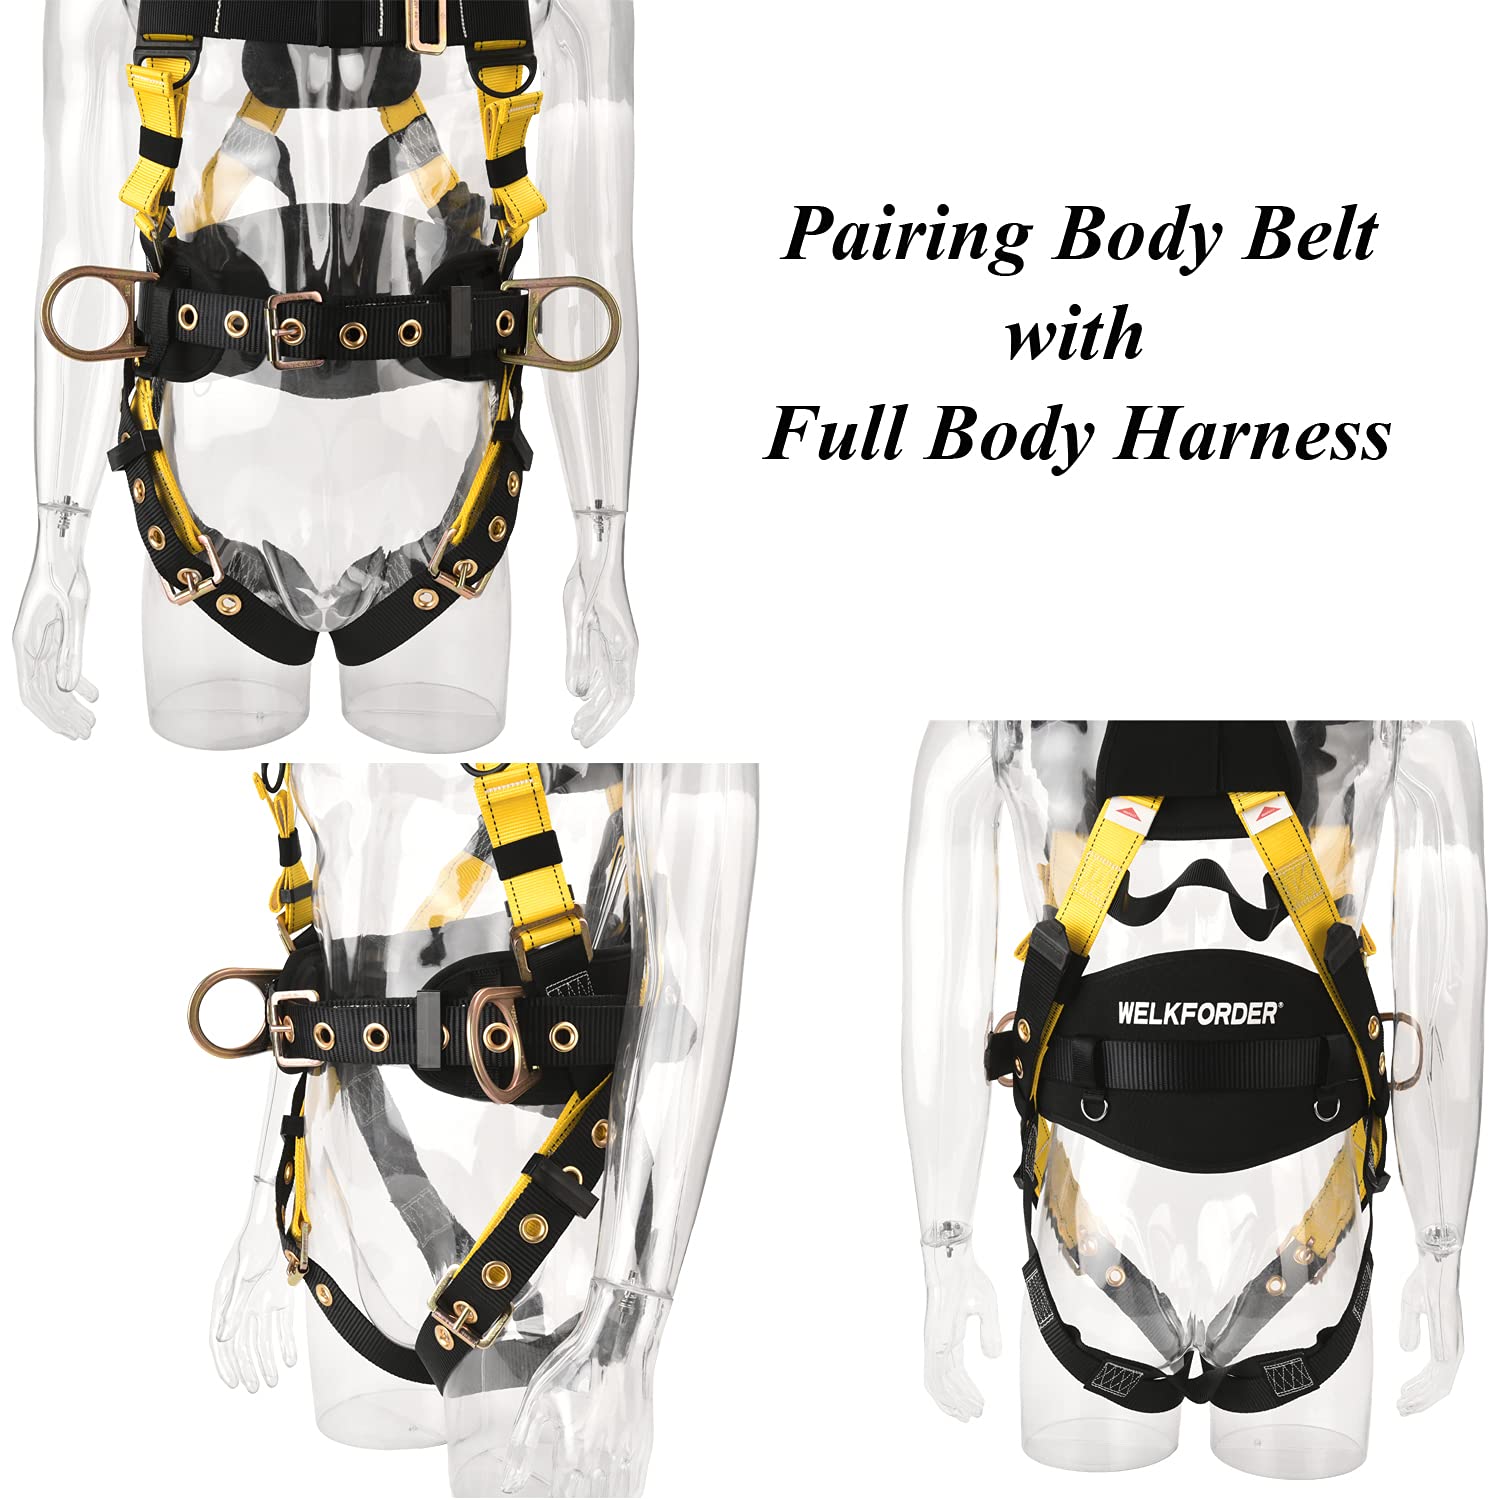 WELKFORDER Tongue Buckle Body Belt With Hot-Pressing Waist Pad and 2 Side D-Rings Personal Protective Equipment Safety Harness | Waist Fitting Size 30'' to 45'' for Work Positioning, Restraint